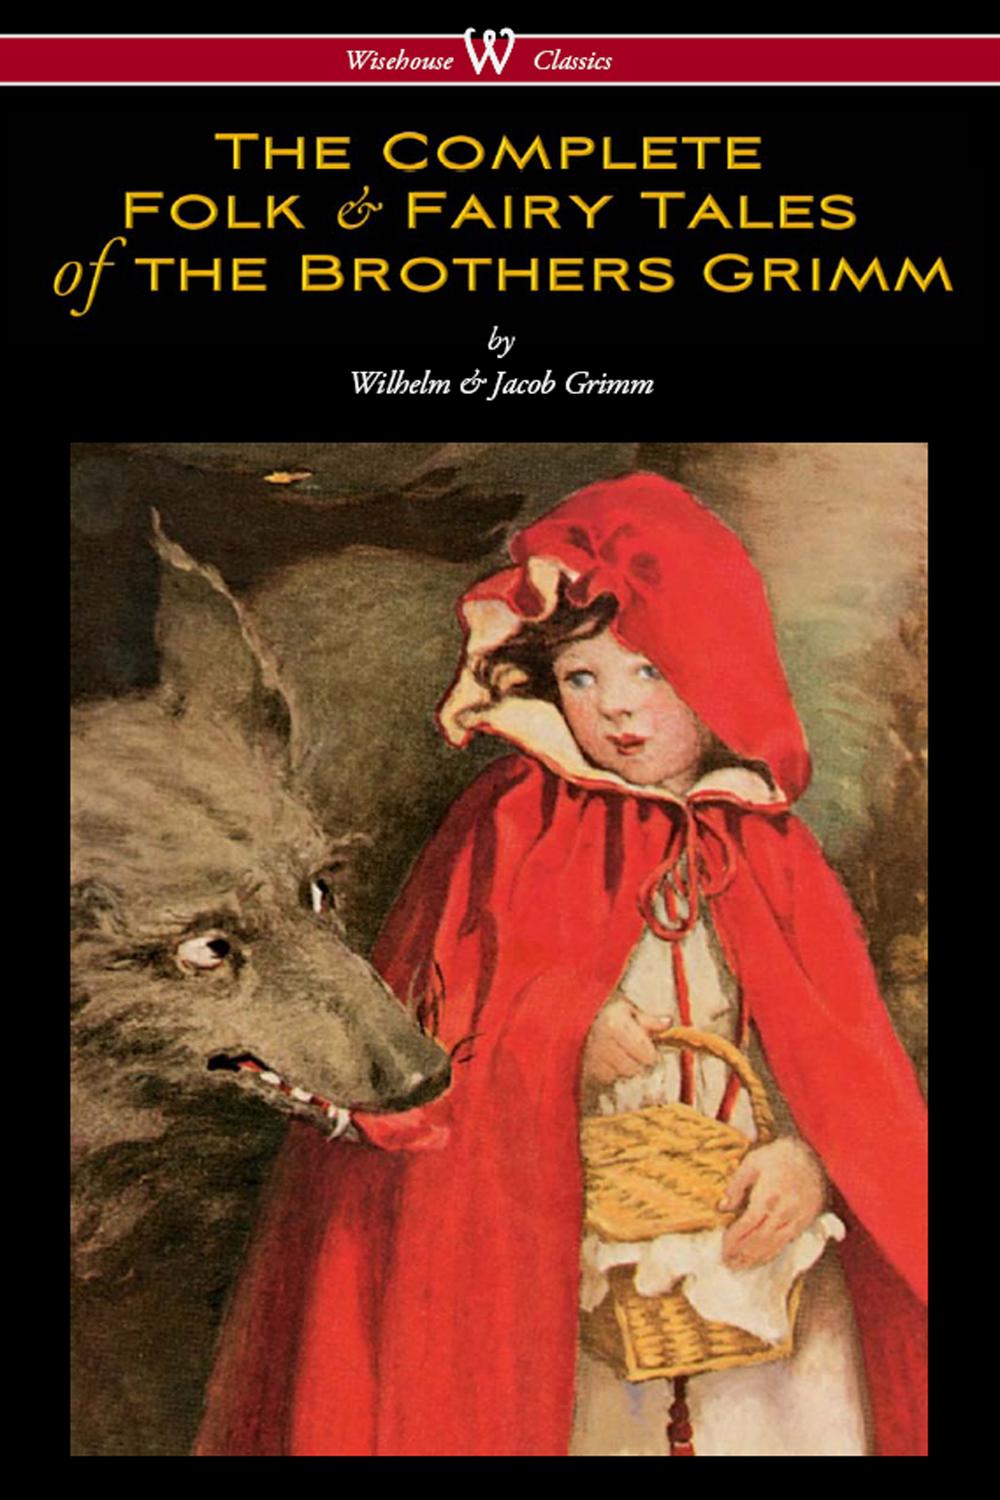 The Complete Folk & Fairy Tales of the Brothers Grimm (Wisehouse Classics - The Complete and Authoritative Edition) - Wilhelm Grimm, Jacob Grimm